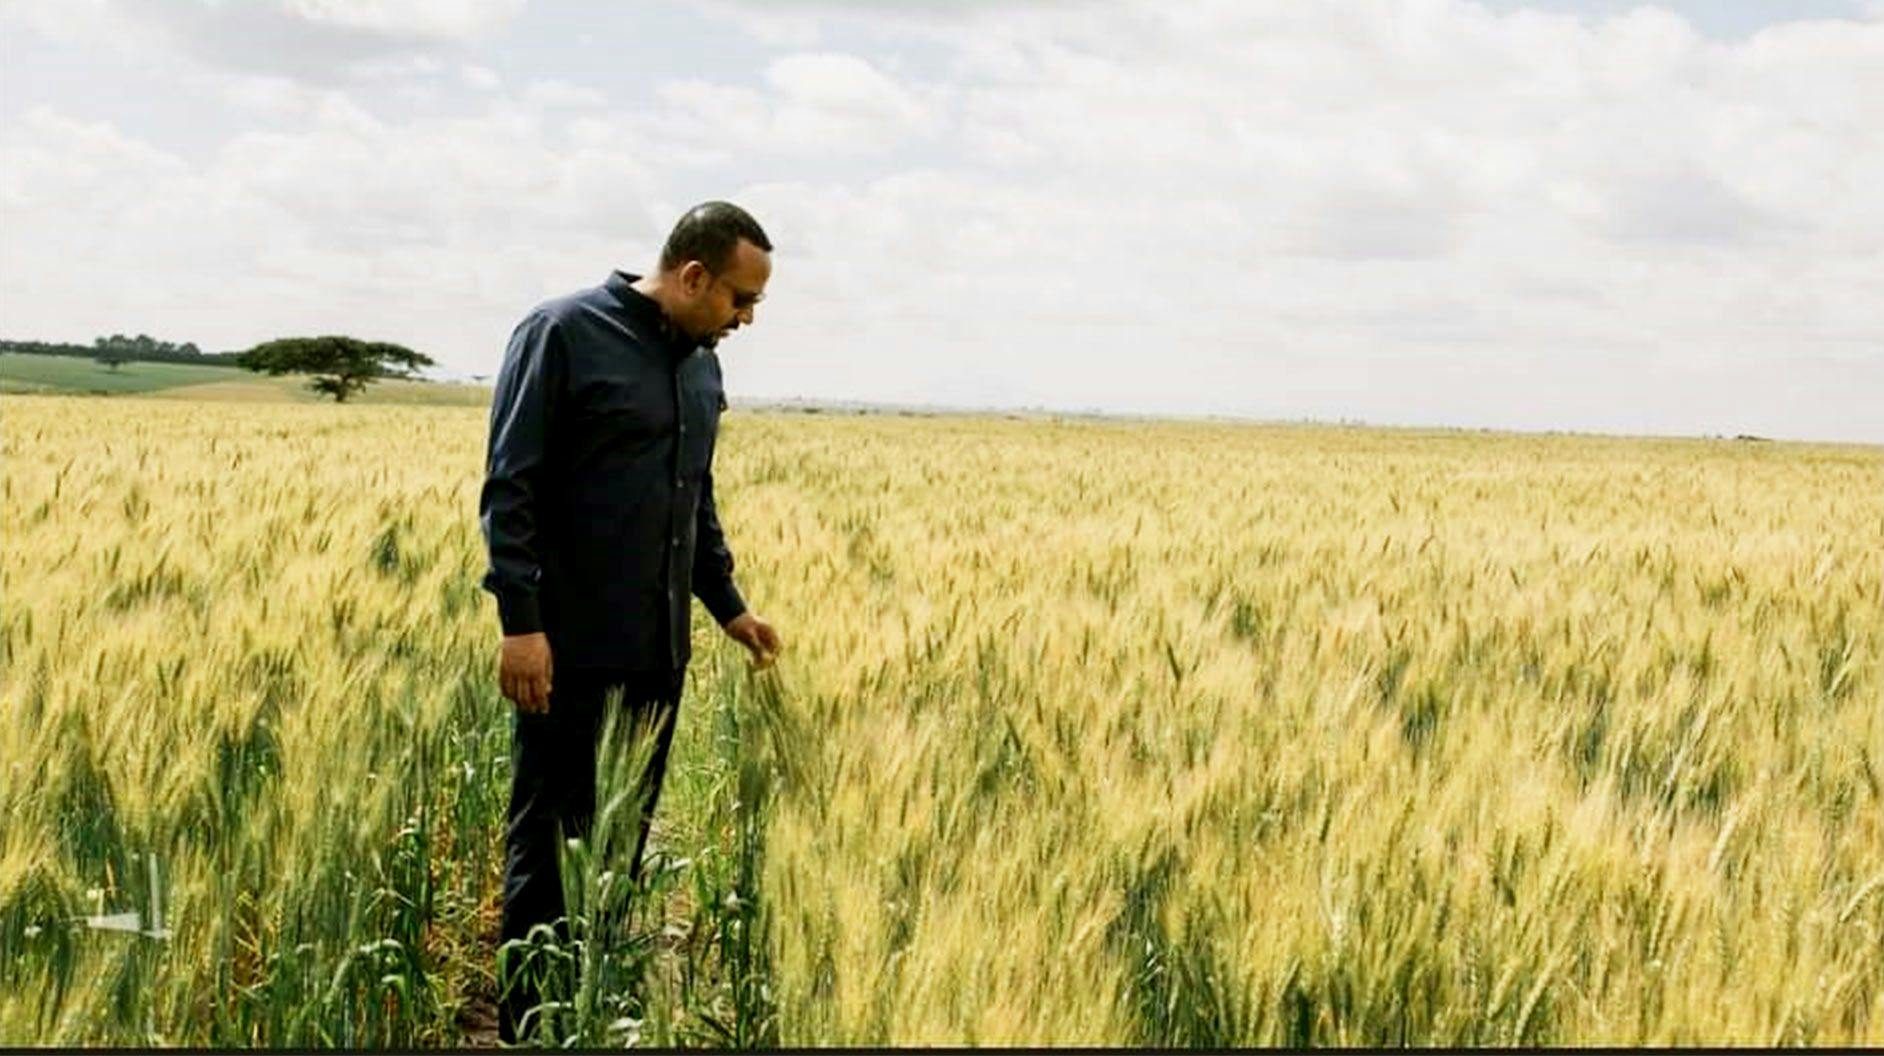 Ethiopia’s wheat production story - a success or hype?